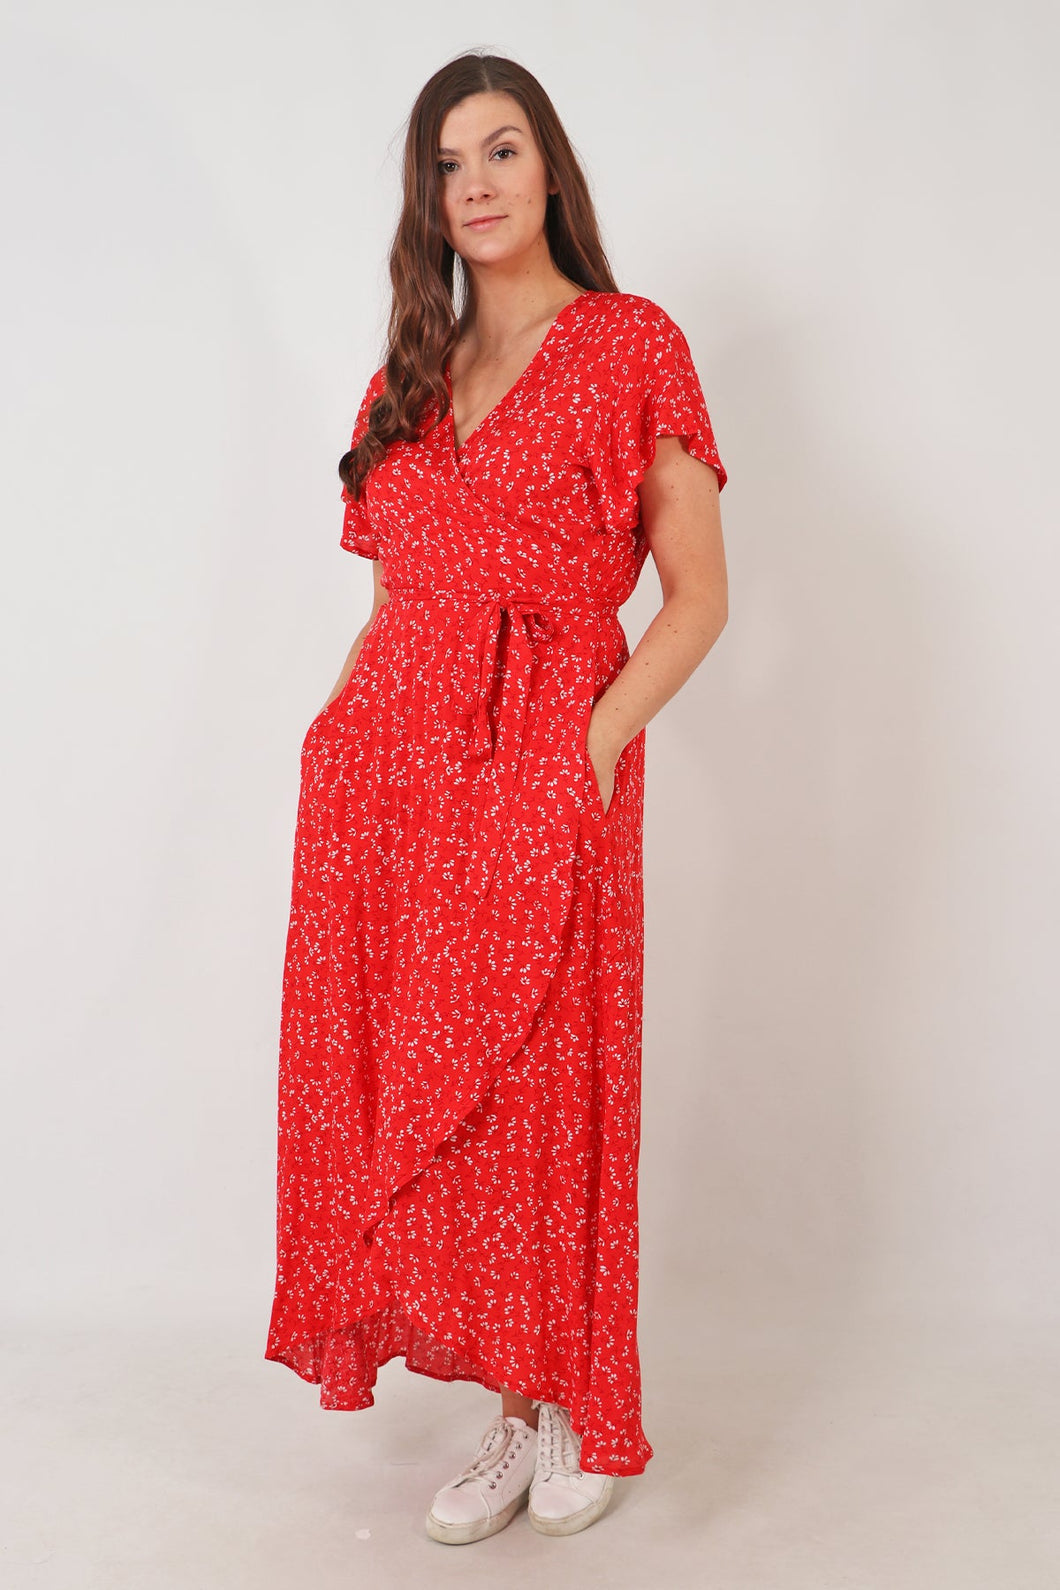 Dainty Floral Wrap Dress - Red